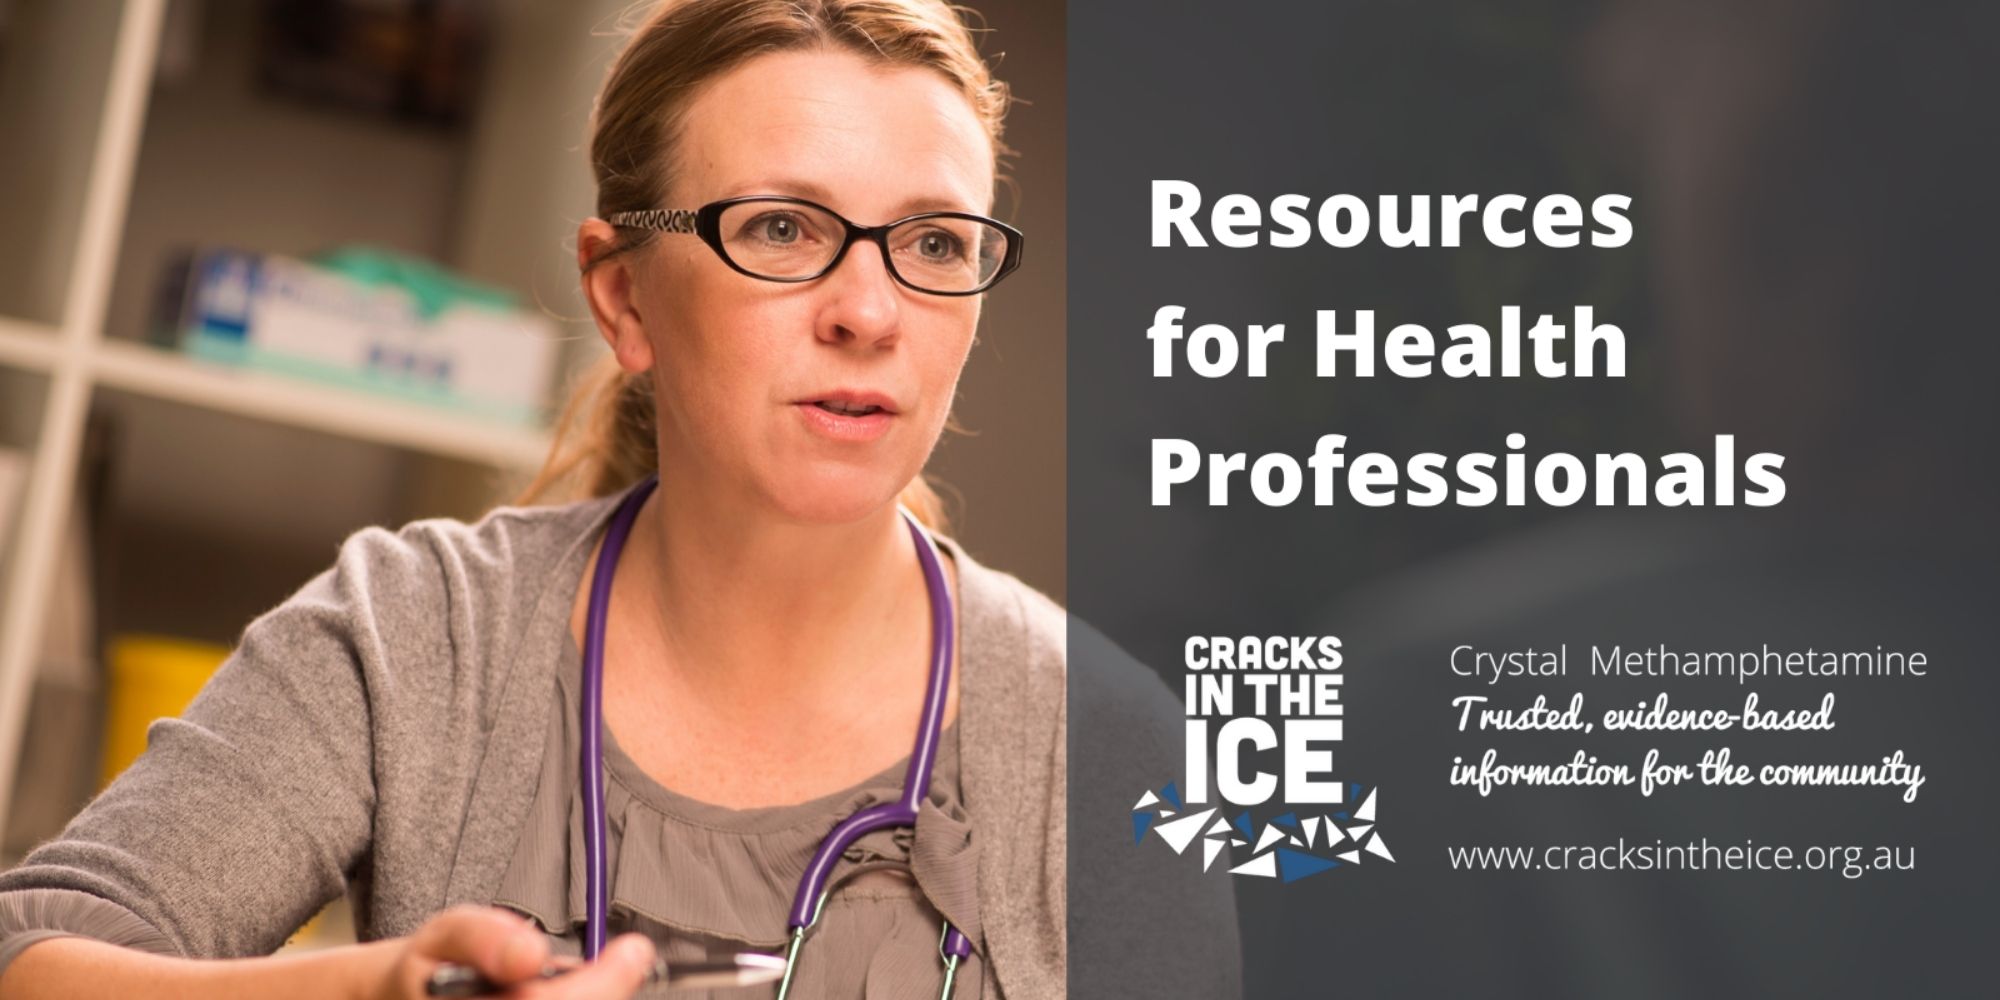 Cracks in the Ice: an online toolkit providing evidence-based information about crystal methamphetamine for health professionals and the community